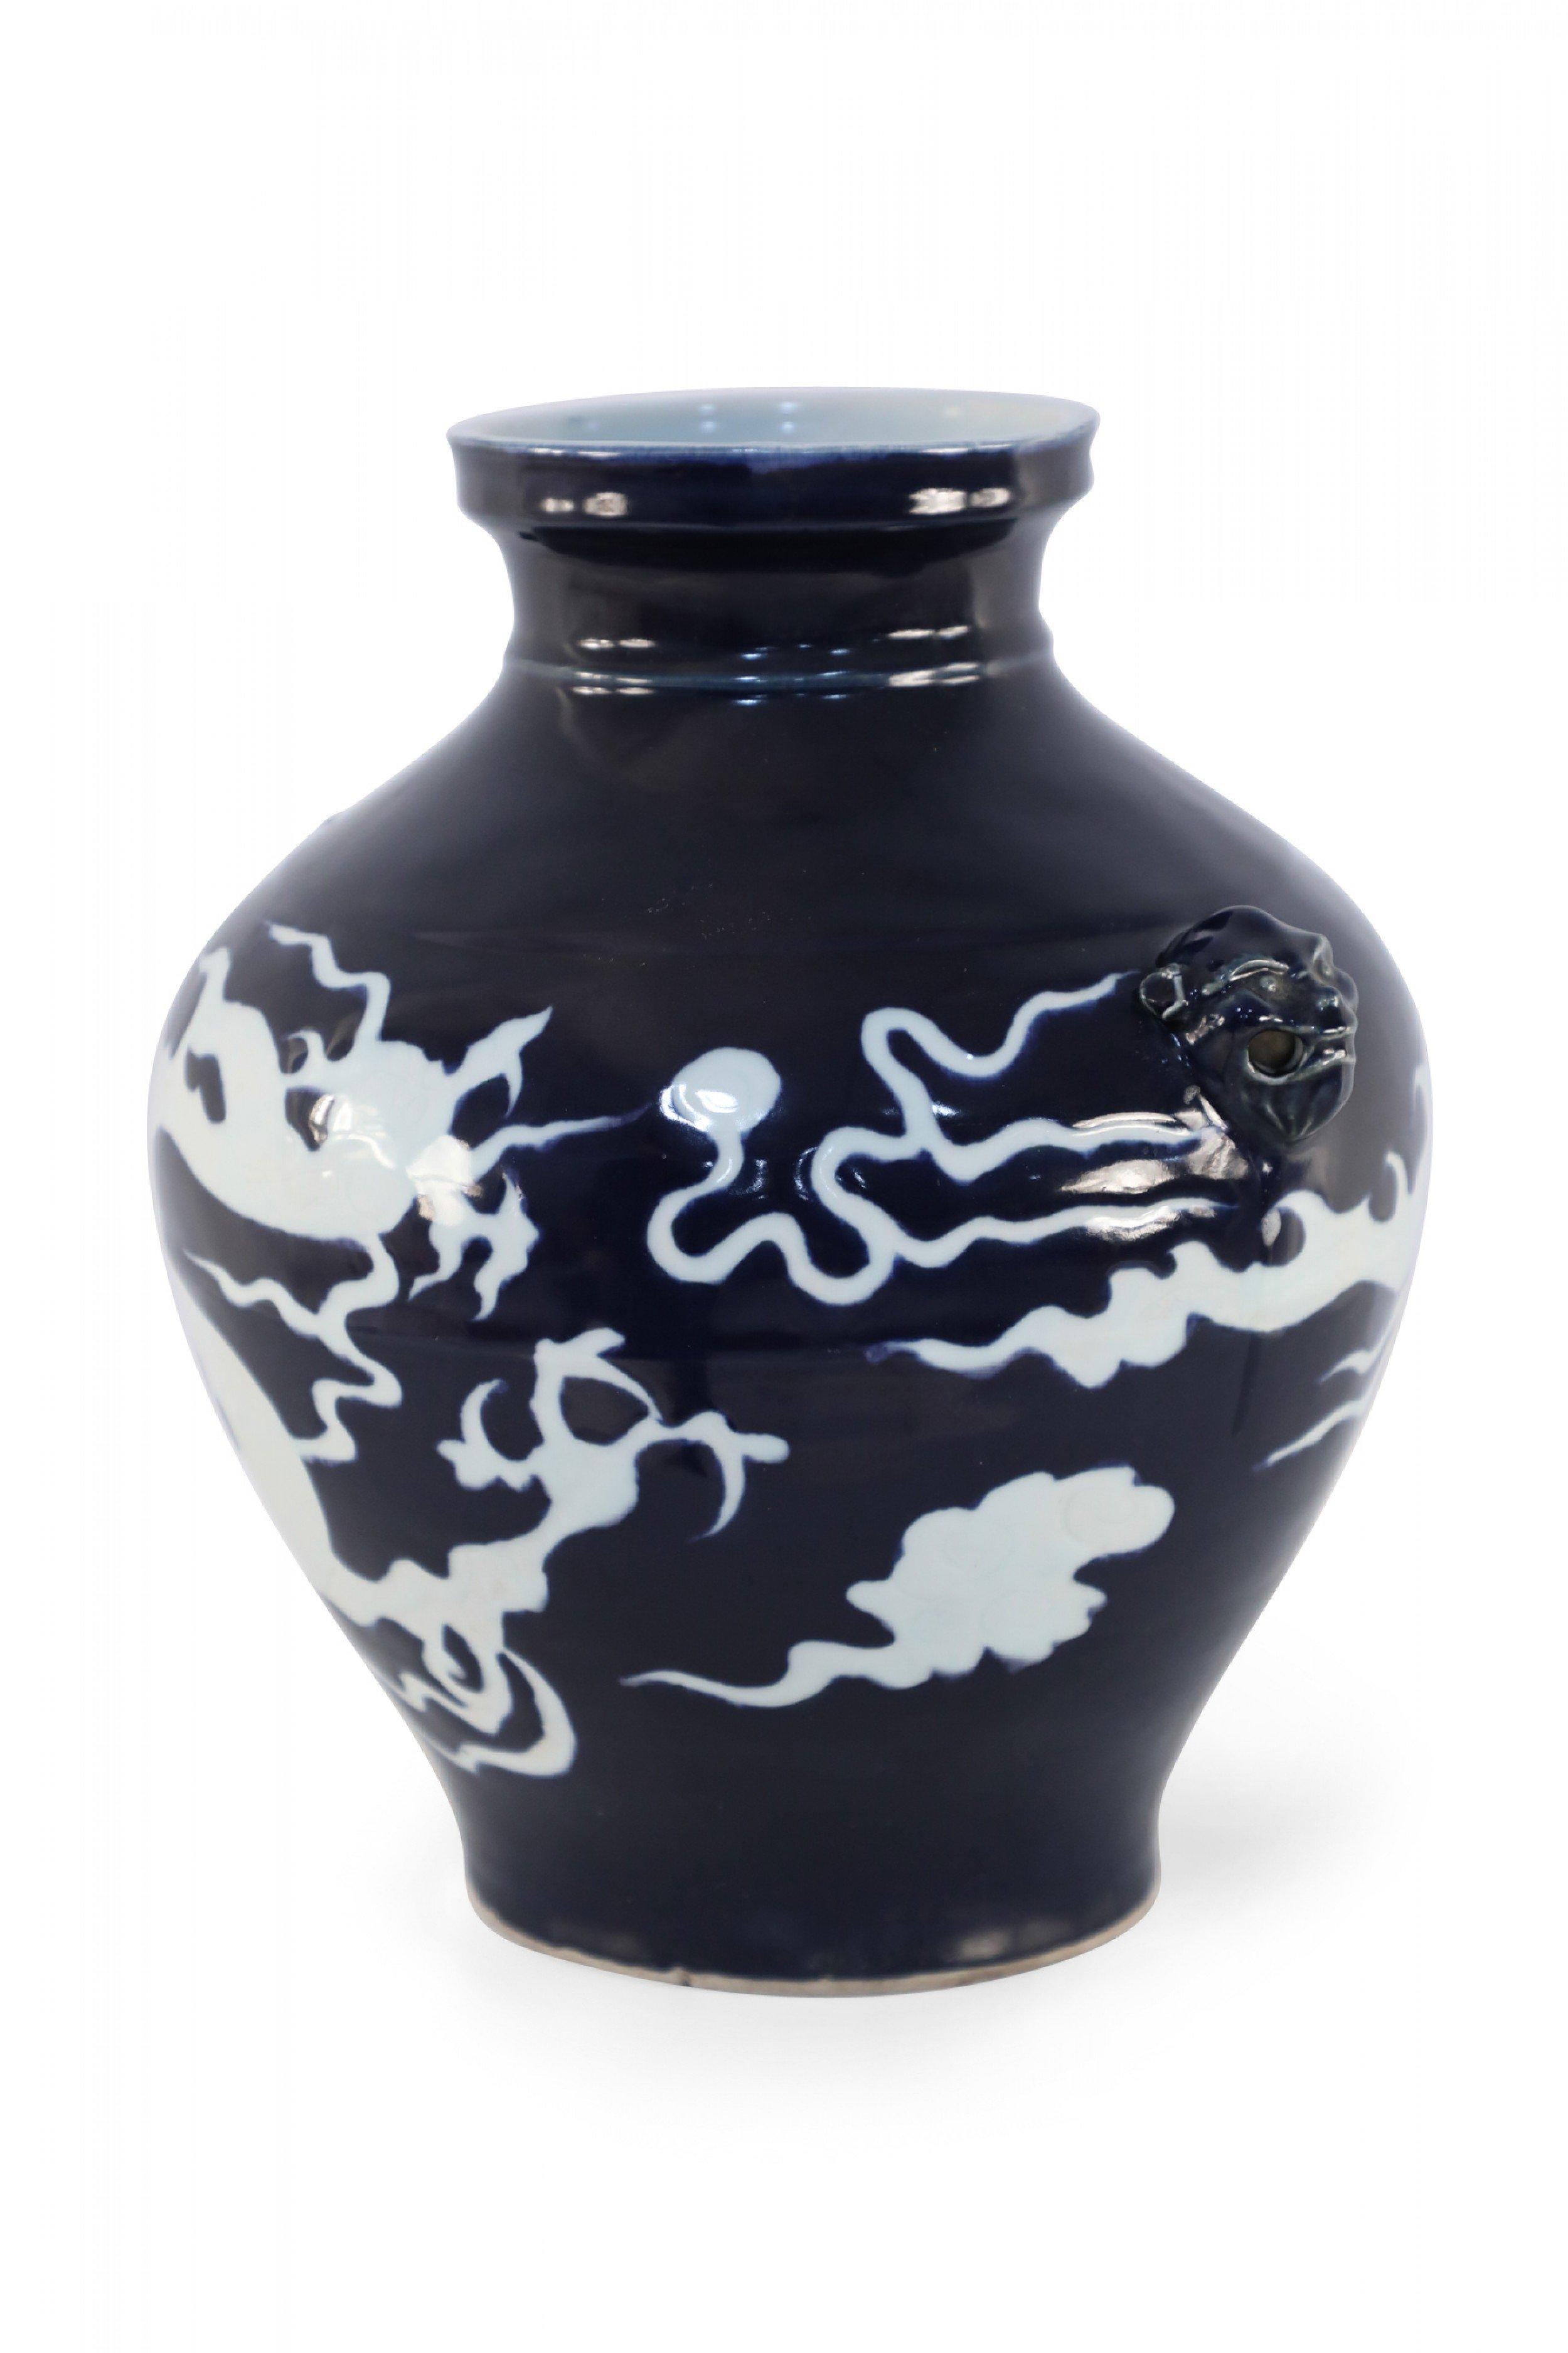 Chinese bulbous, dark blue porcelain pot crafted in the Yuan Dynasty style, wrapped in the dynamic white shape of a dragon and accented with foo dog ornamentation along the sides.
  